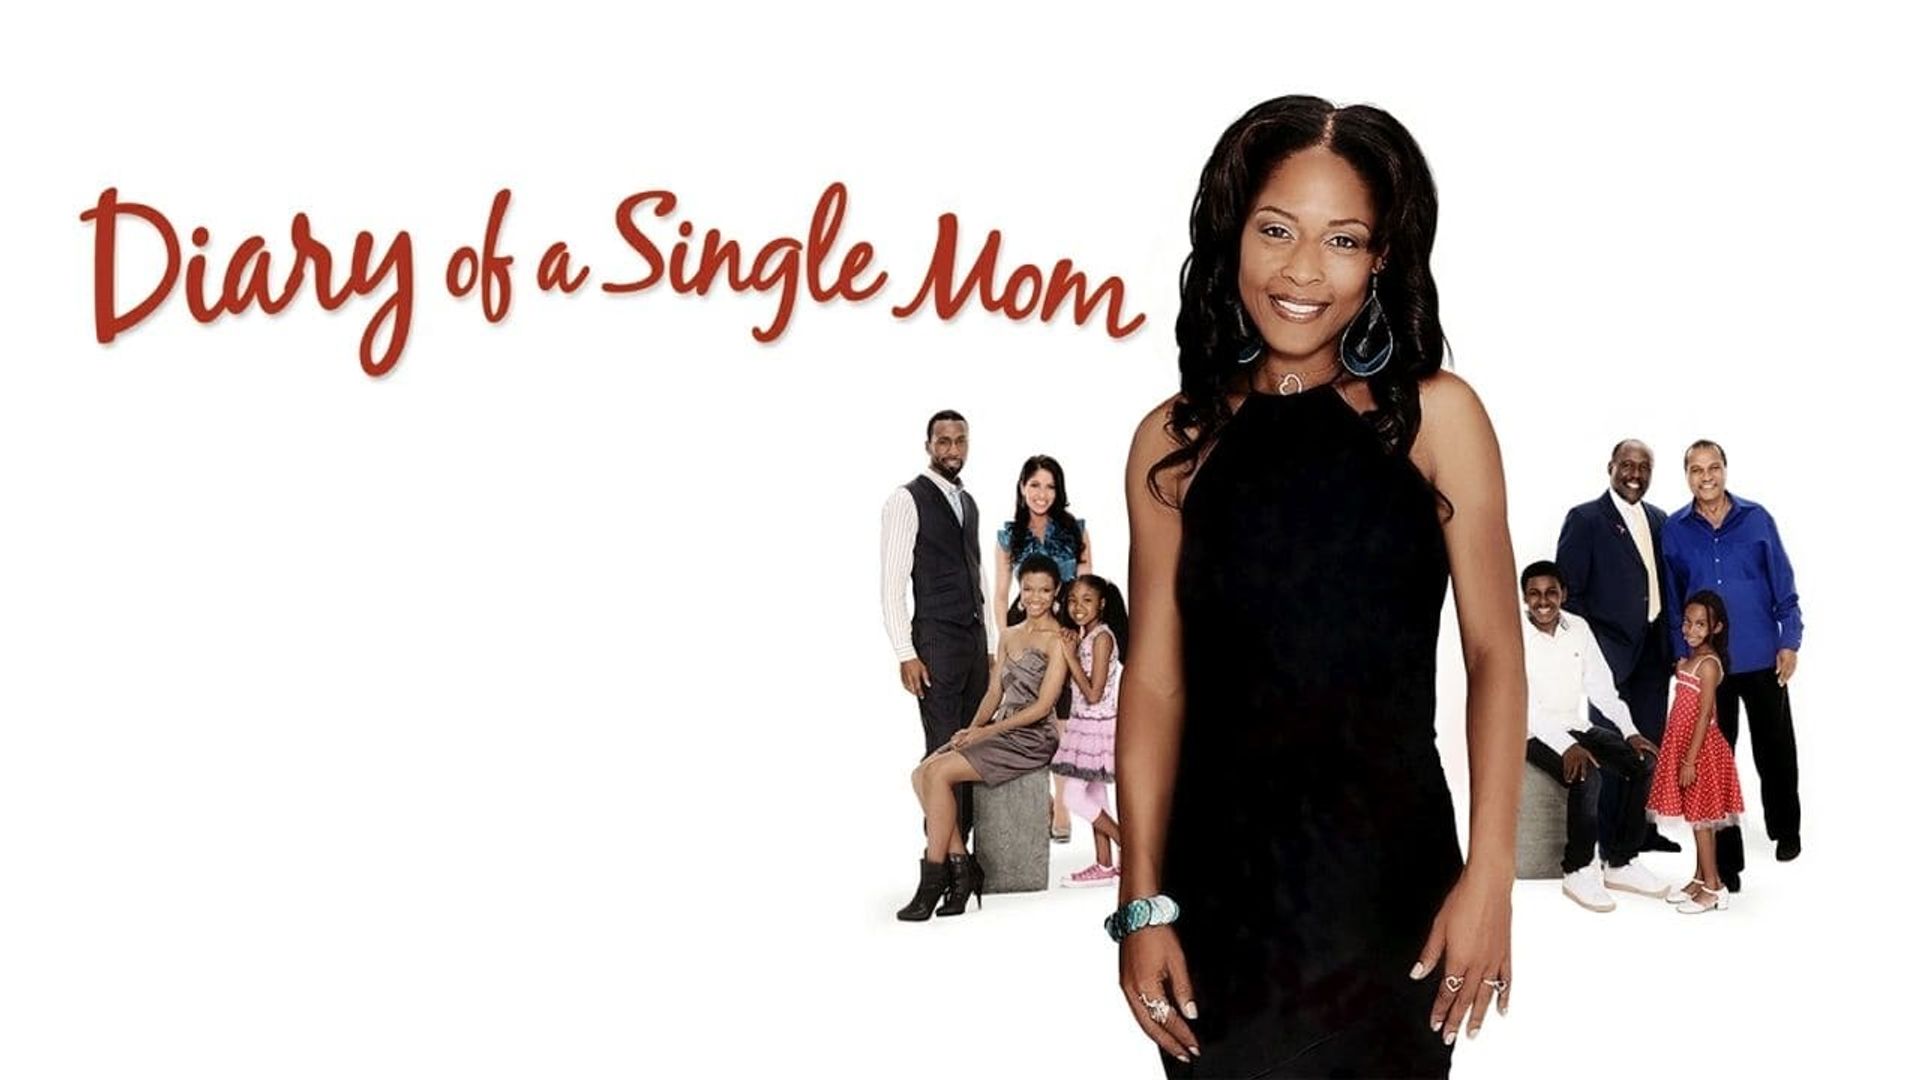 Diary of a Single Mom background